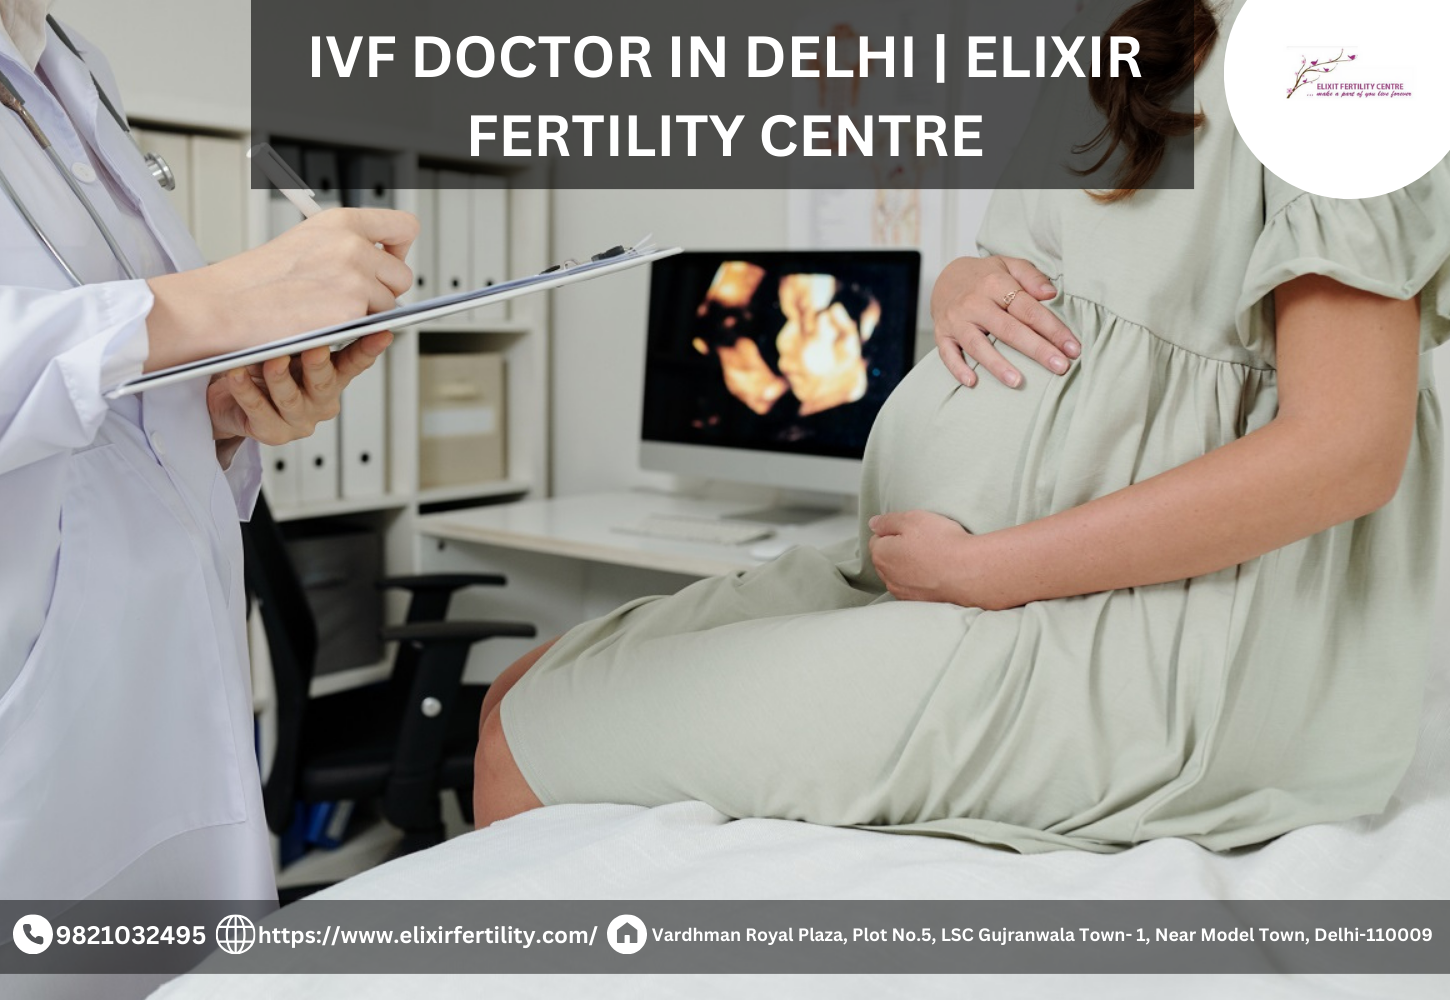 Your Journey to Parenthood Begins at Elixir Fertility Centre – Top IVF Doctor in Delhi – IVF Clinic in Delhi | IVF Doctor in Delhi | Best IVF Specialist in India